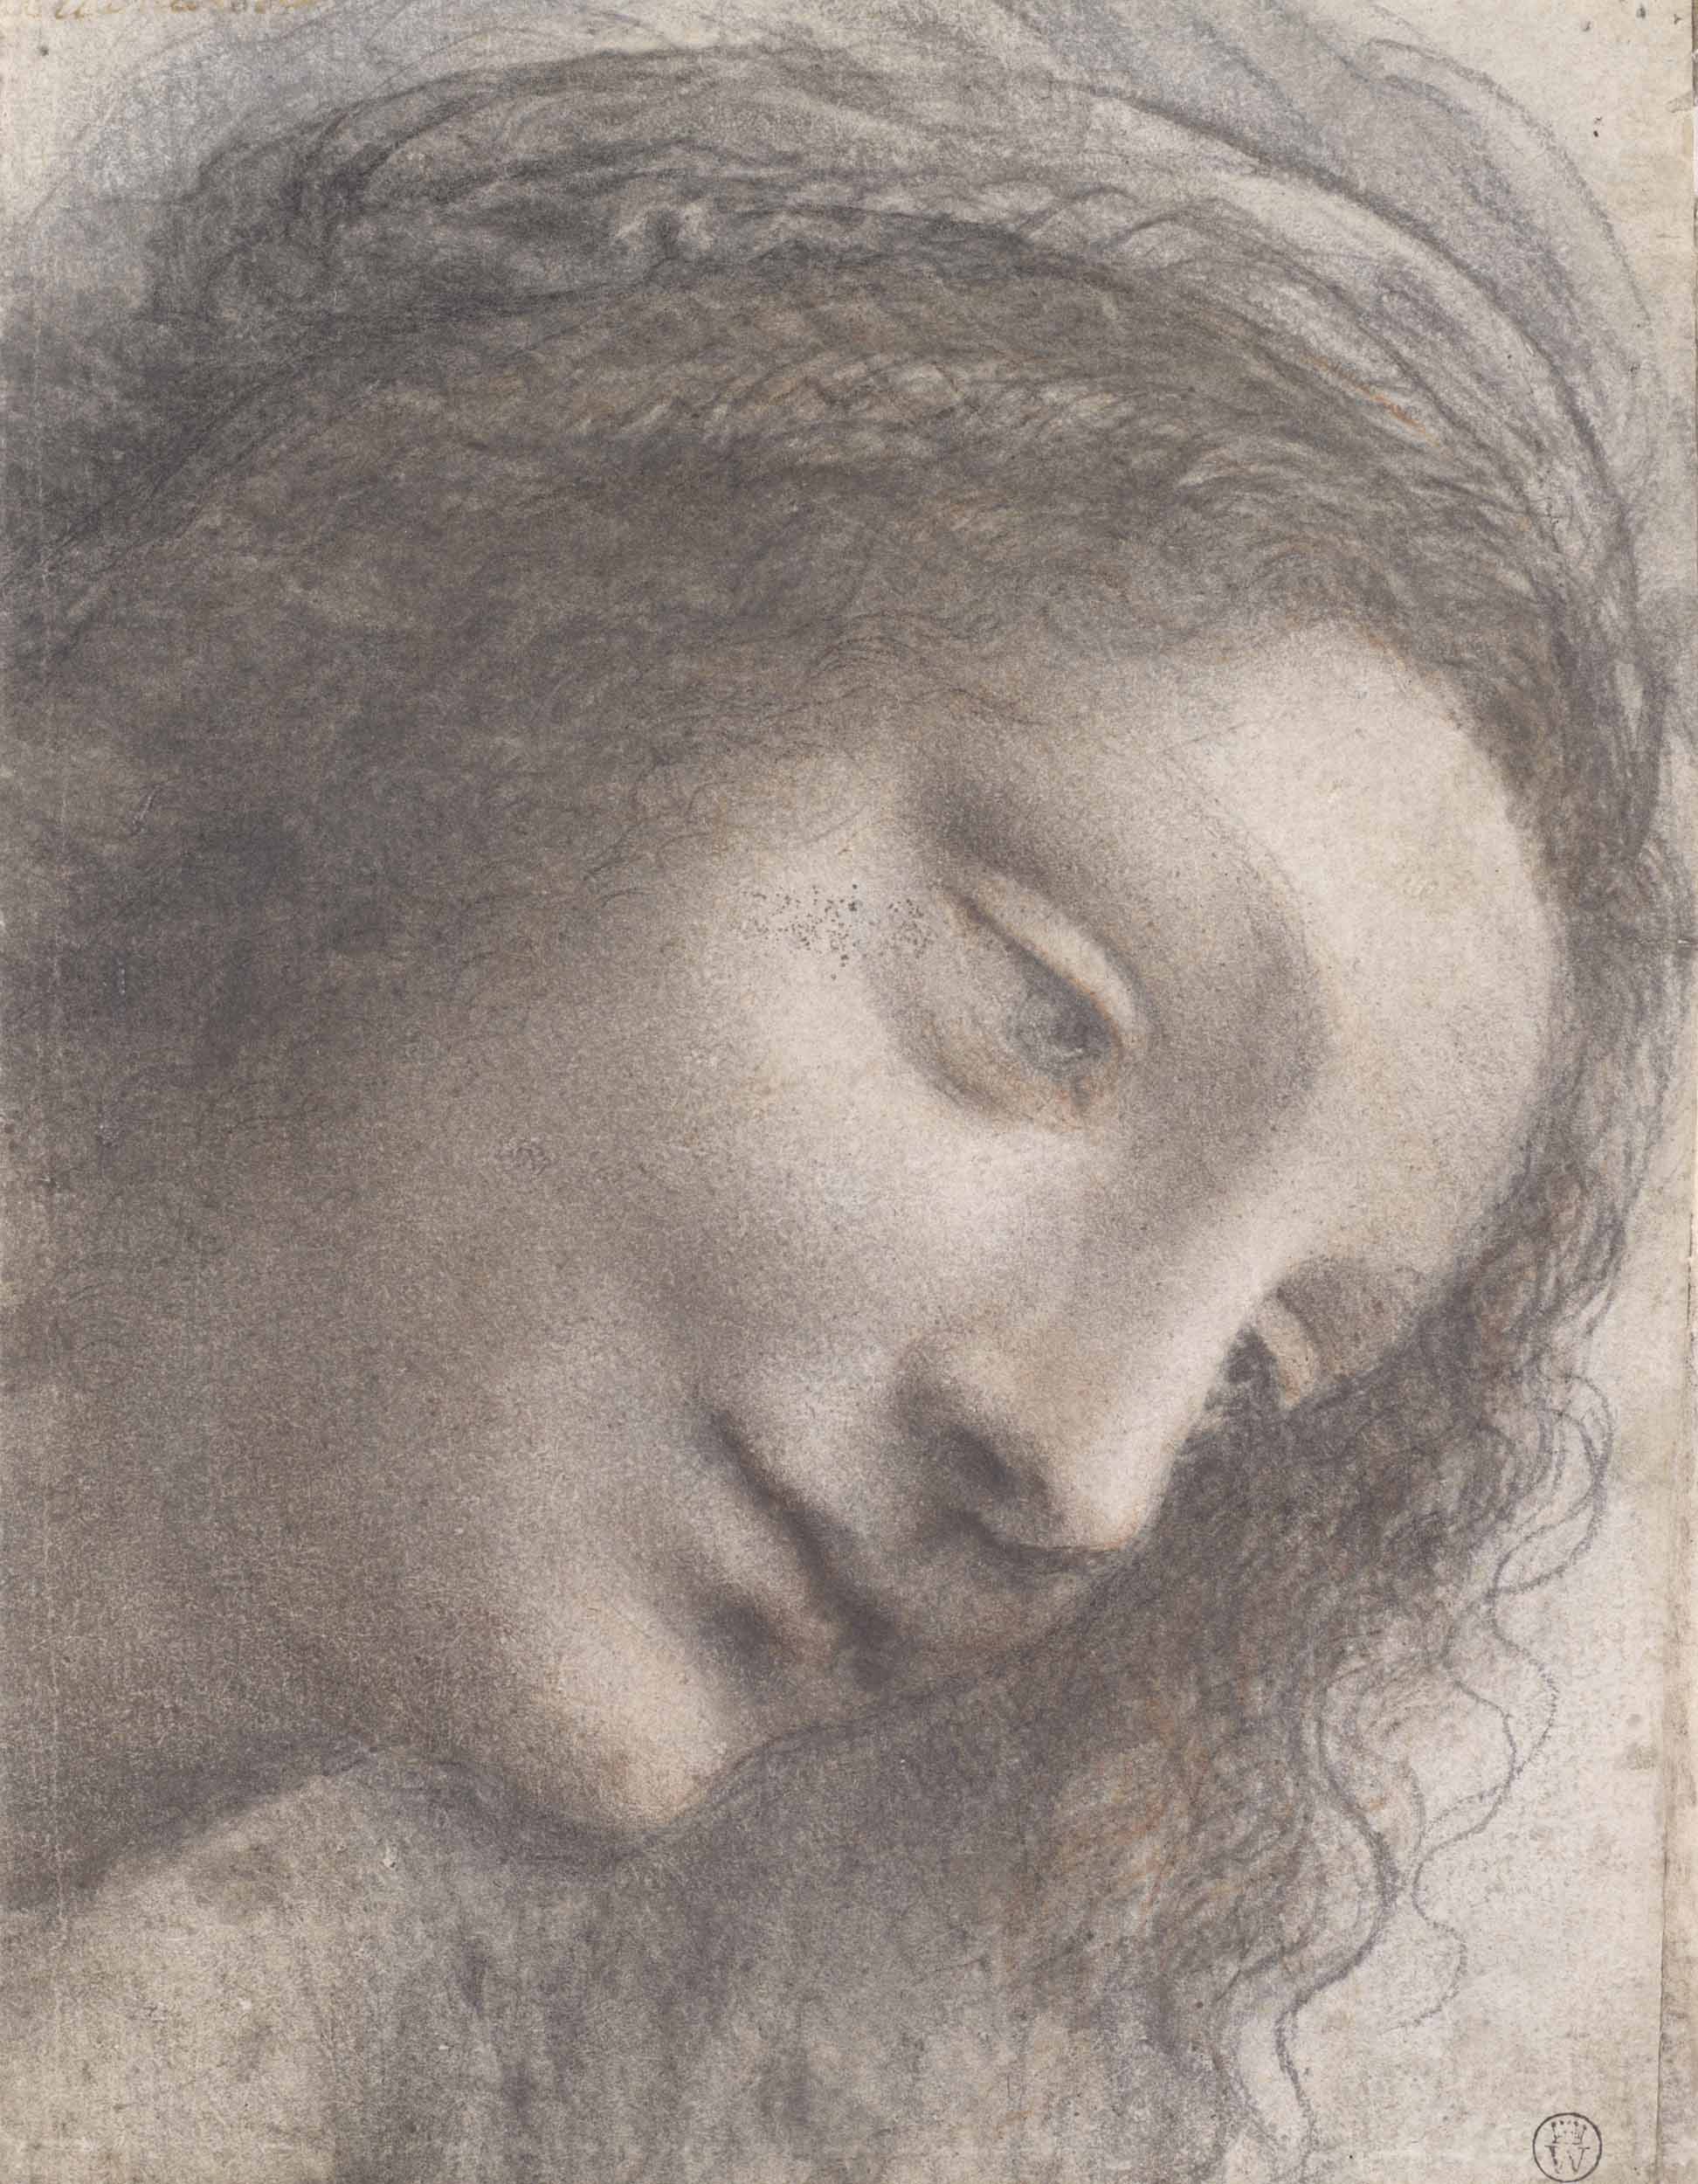 “The Head of the Virgin in Three-Quarter View Facing Right,” painting